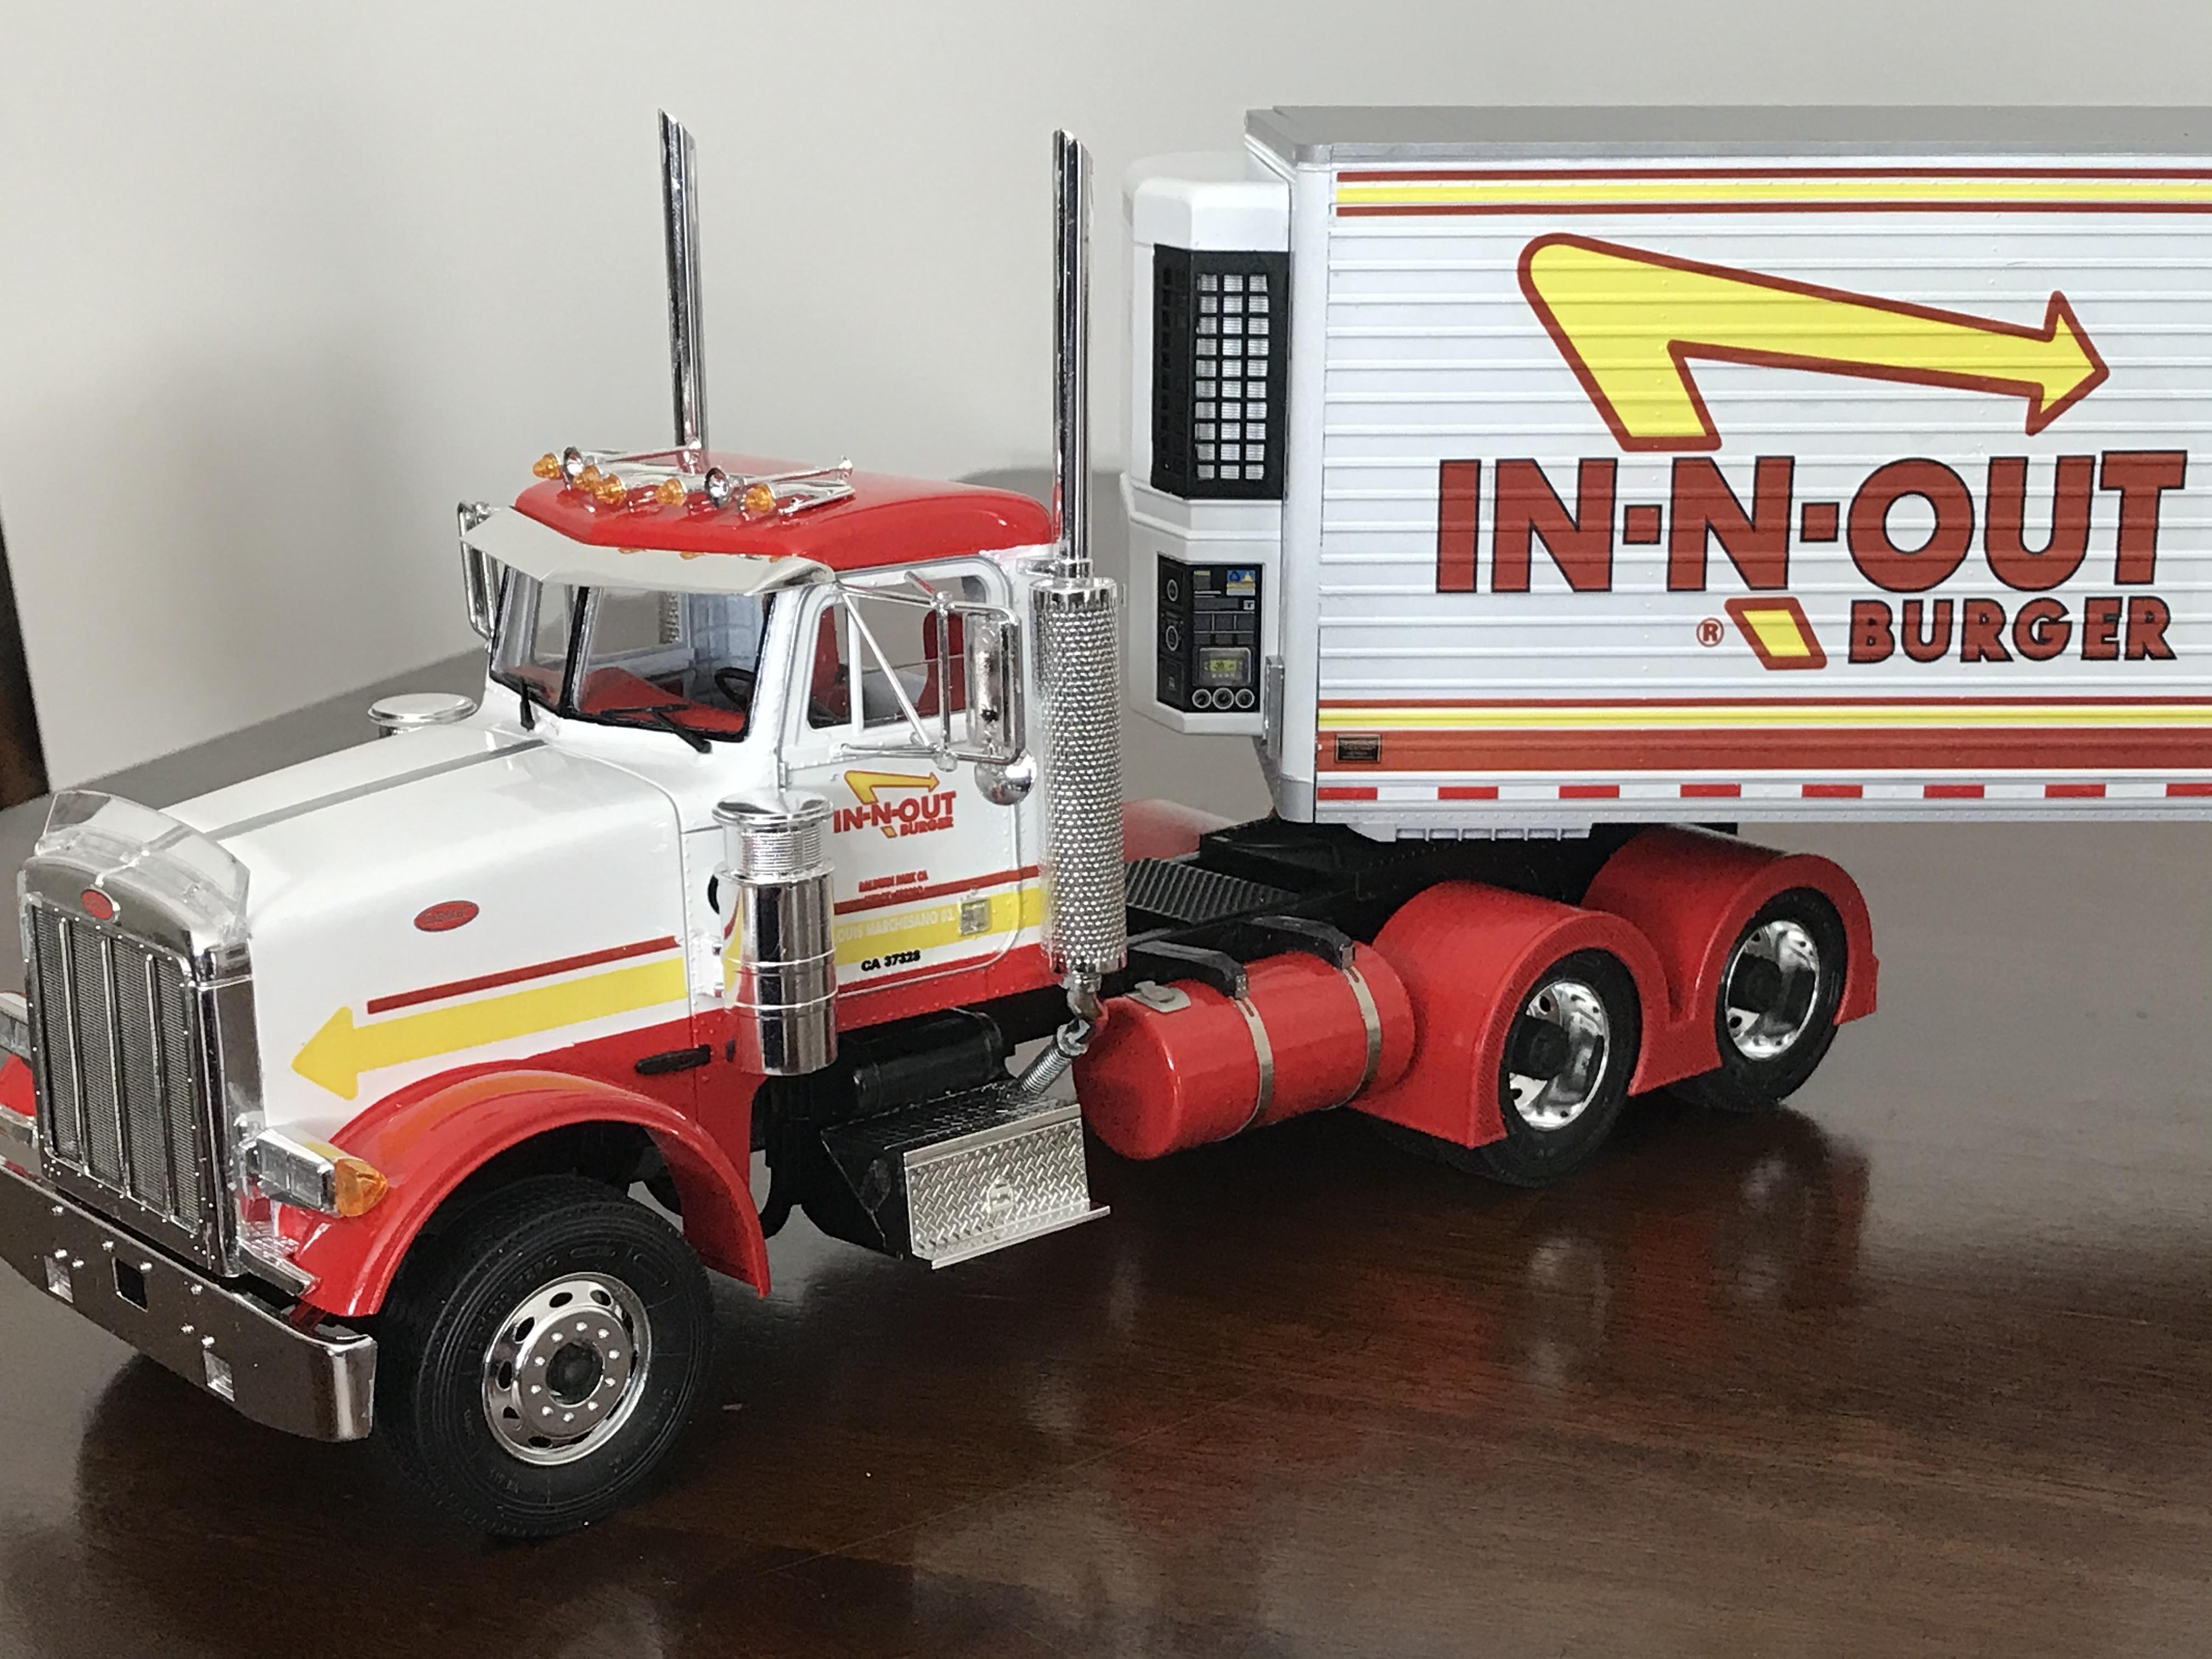 In and Out Burger Peterbilt - Model Trucks: Big Rigs and Heavy ...